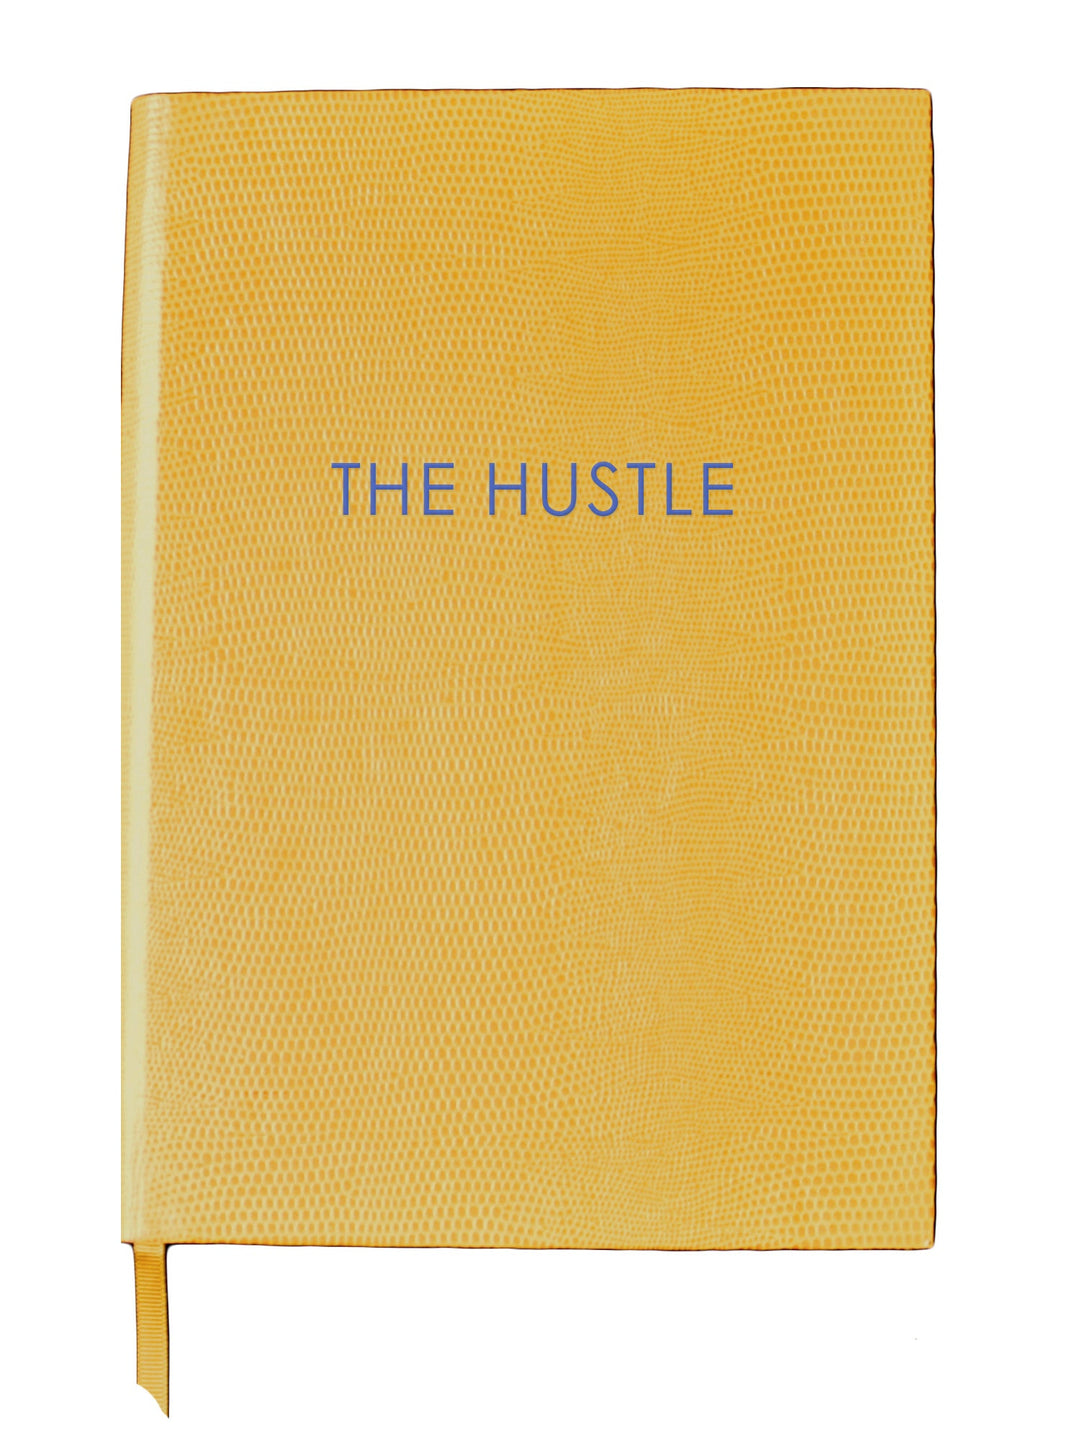 The Hustle Notebook